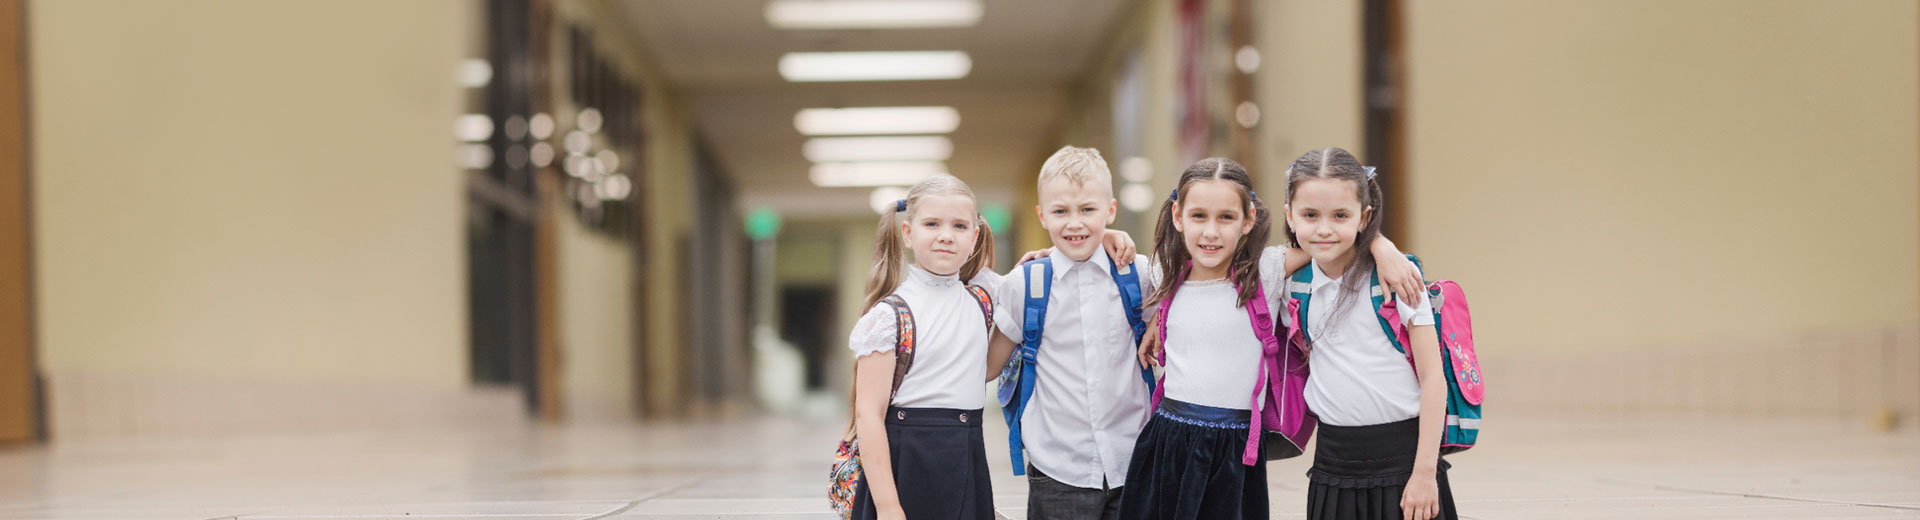 School Uniforms Manufacturers in Hungary